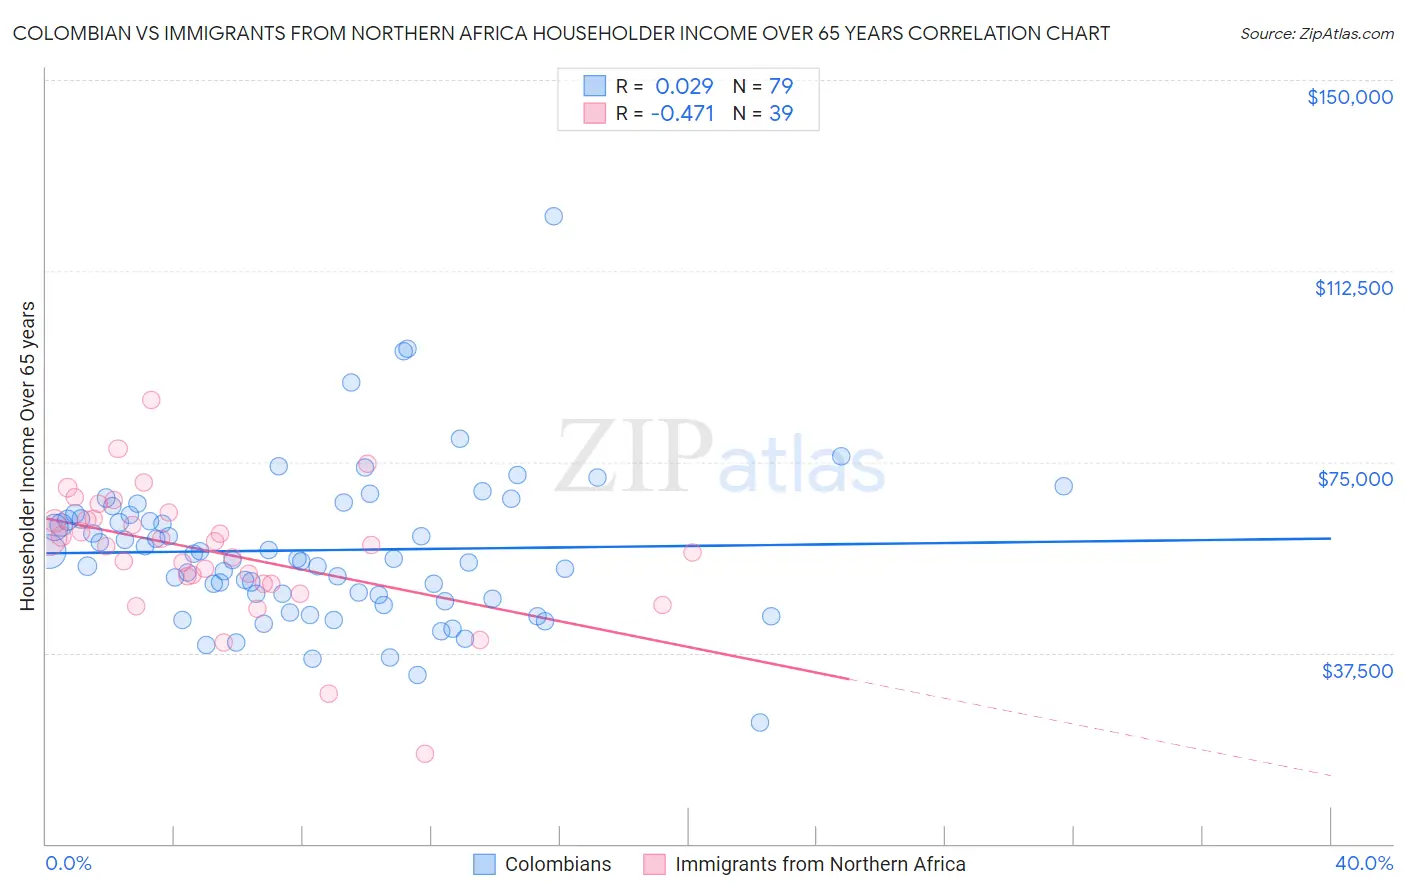 Colombian vs Immigrants from Northern Africa Householder Income Over 65 years